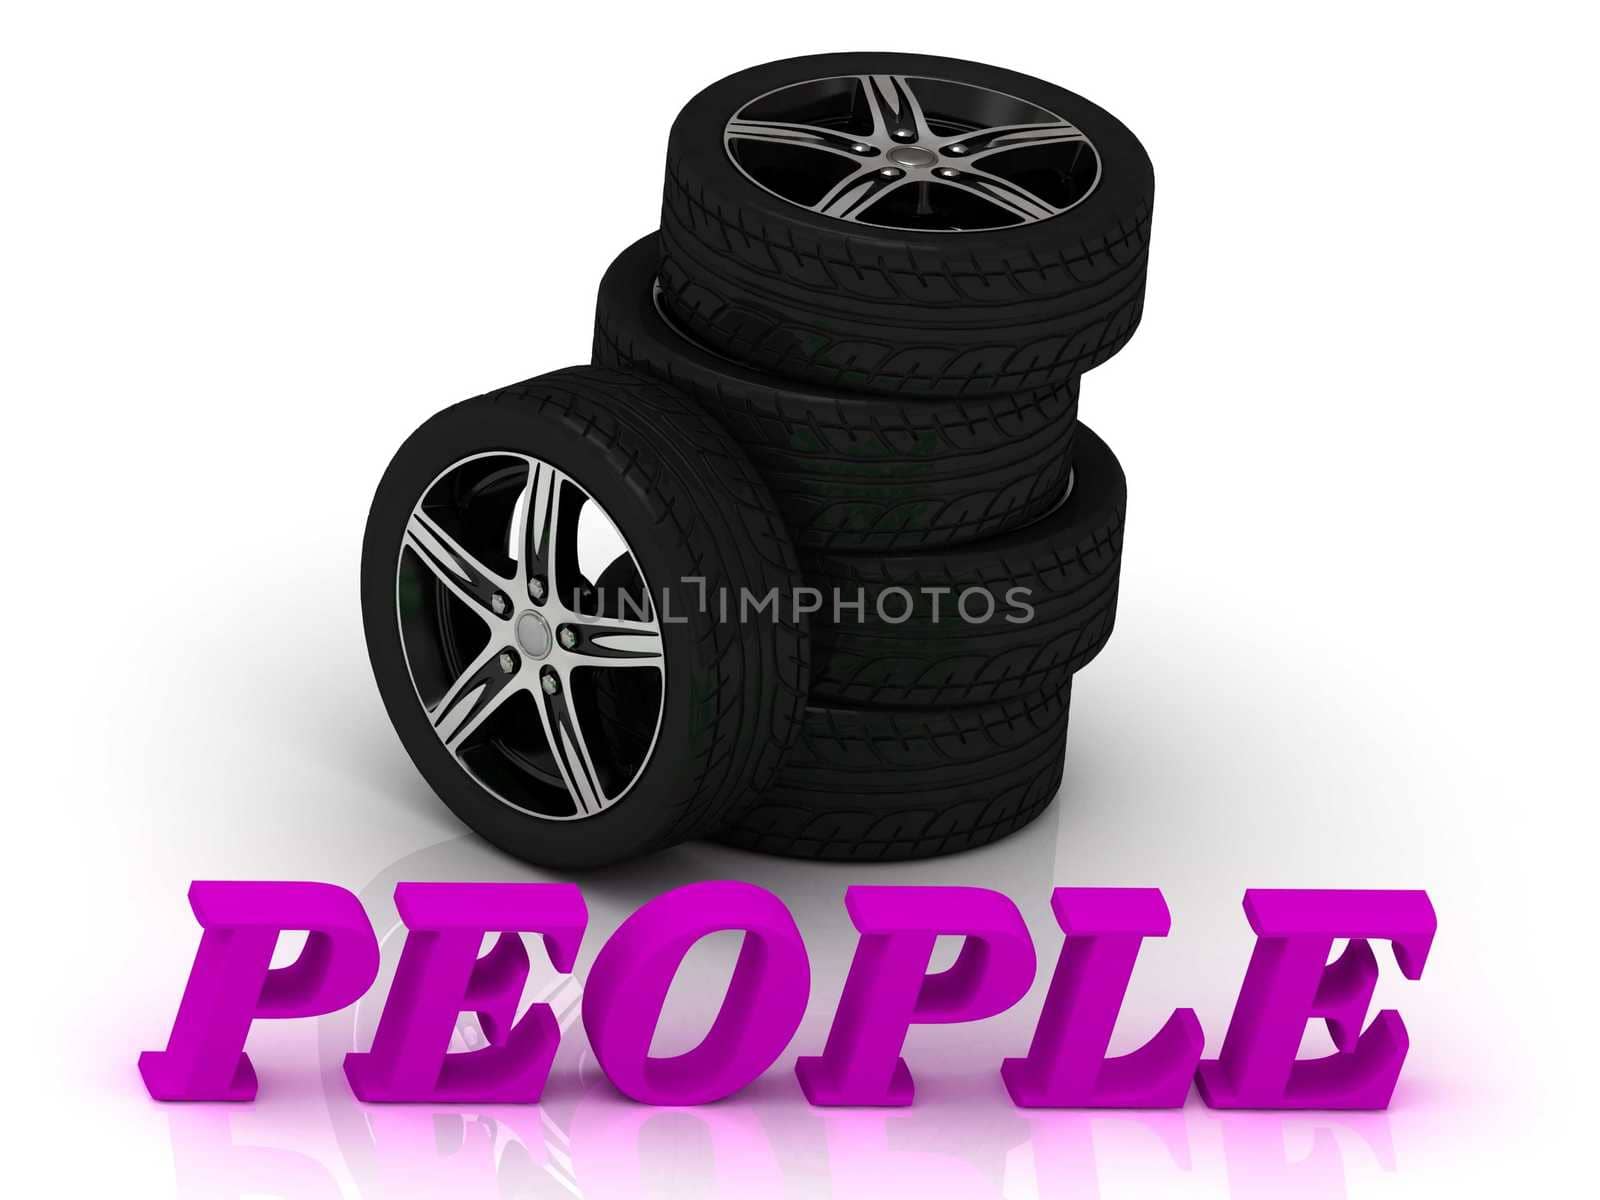 PEOPLE- bright letters and rims mashine black wheels by GreenMost